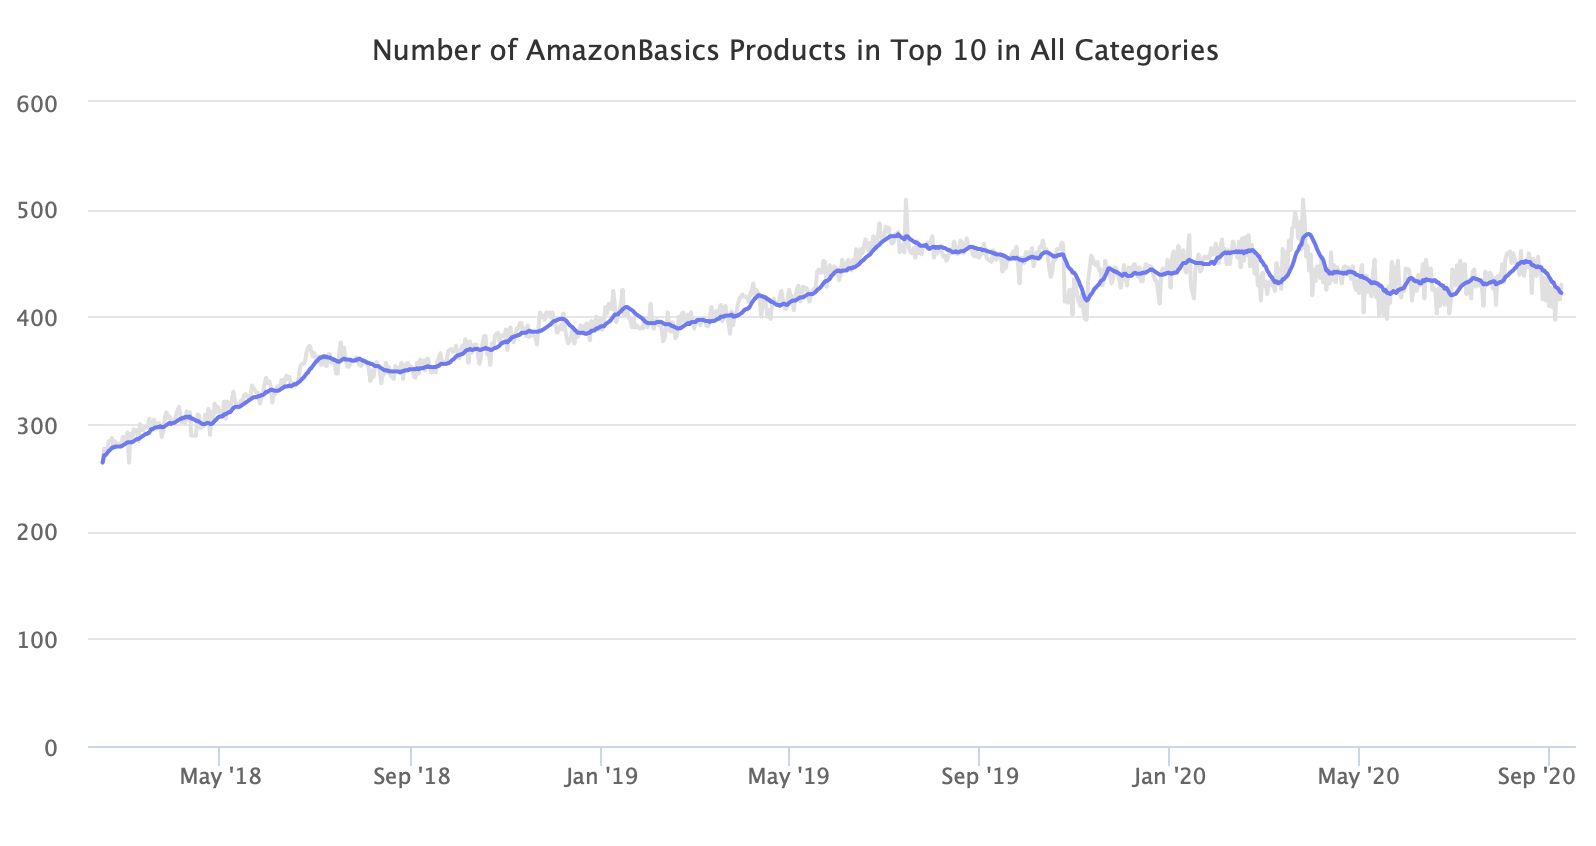 Number of AmazonBasics Products in Top 10 in All Categories